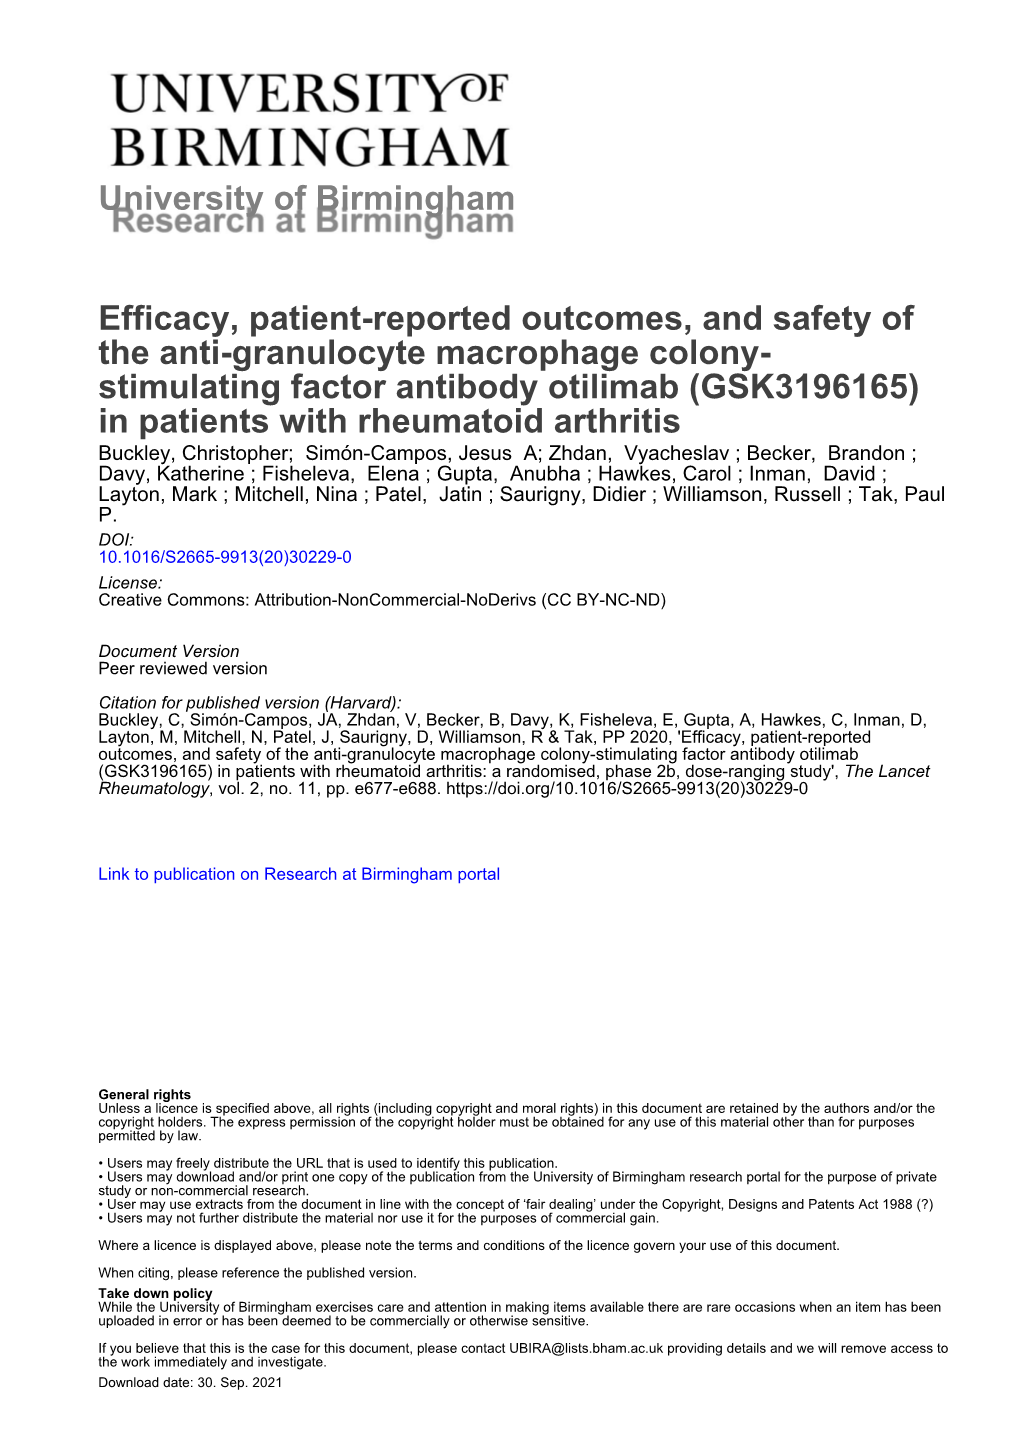 University of Birmingham Efficacy, Patient-Reported Outcomes, And